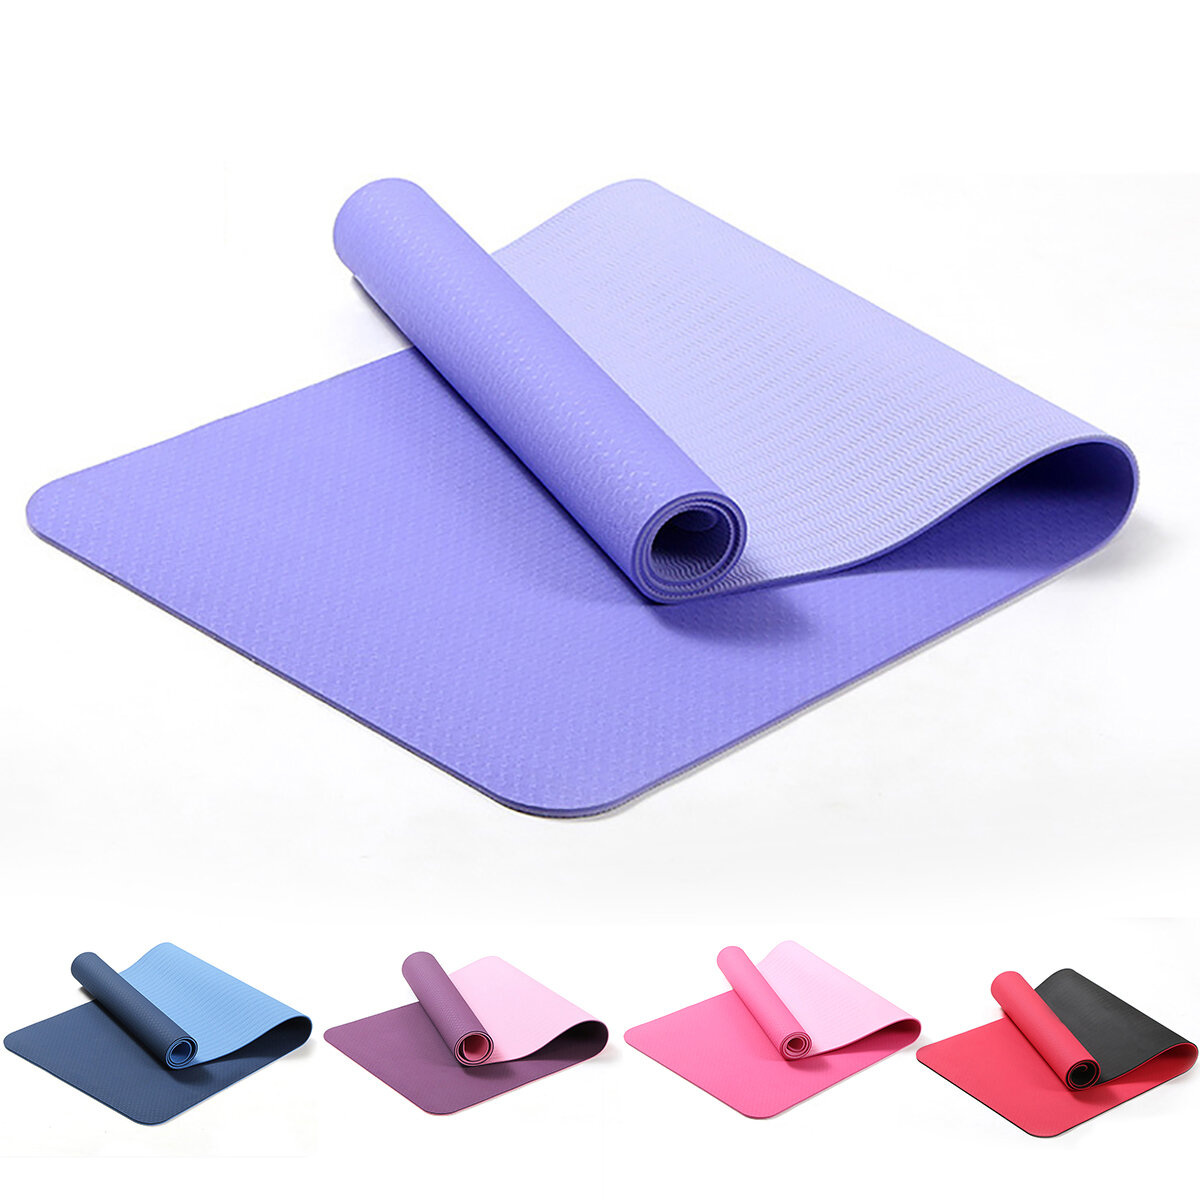 6MM Thicken Non-Slip Texture Professional Yoga Mats w/ Carrying Bag ...